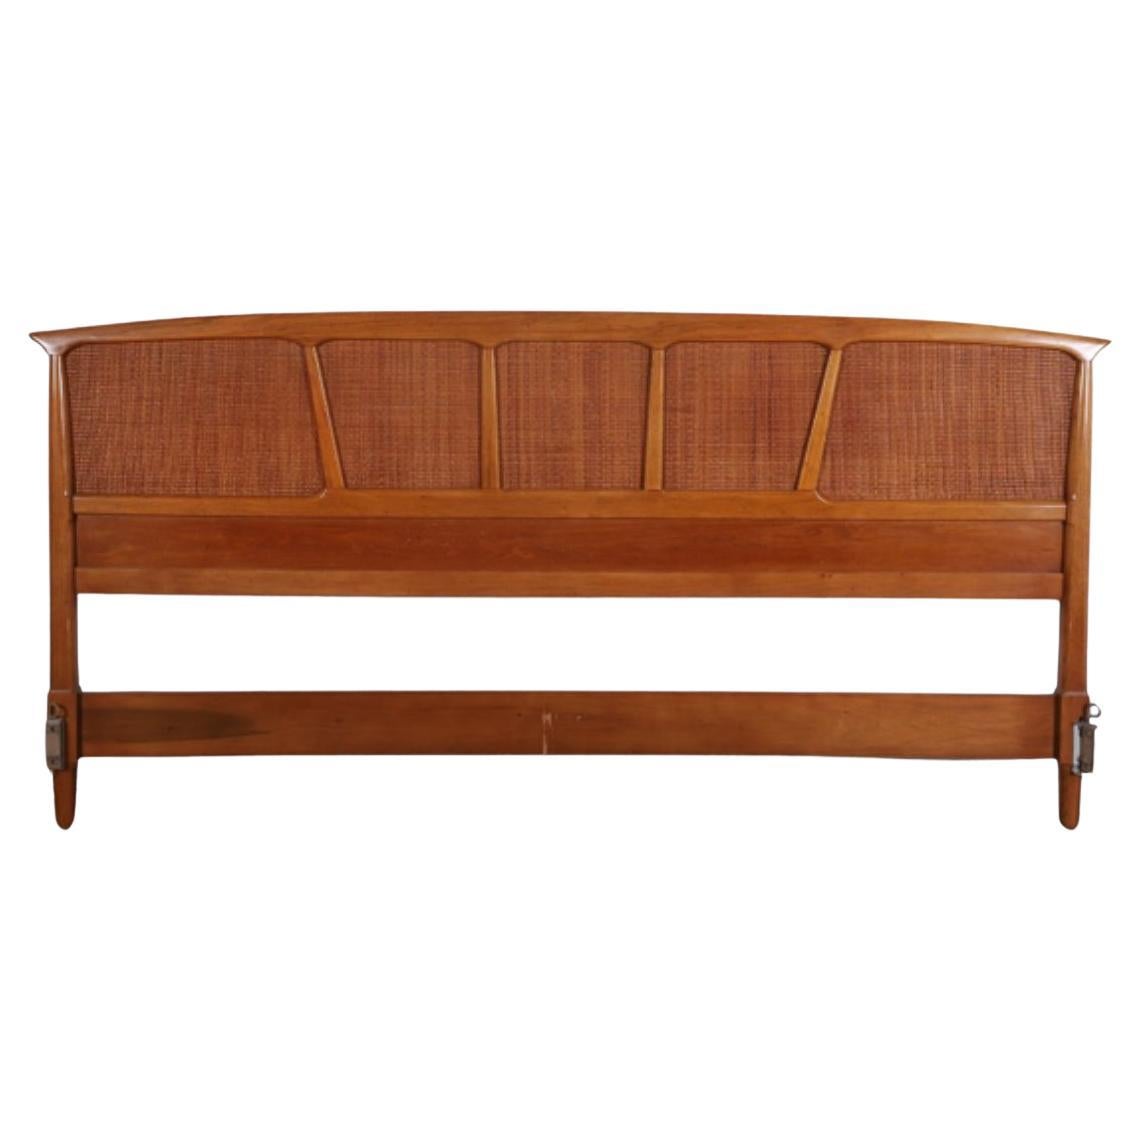 Beautiful walnut sculpted cane King size bed headboard by Tomlinson